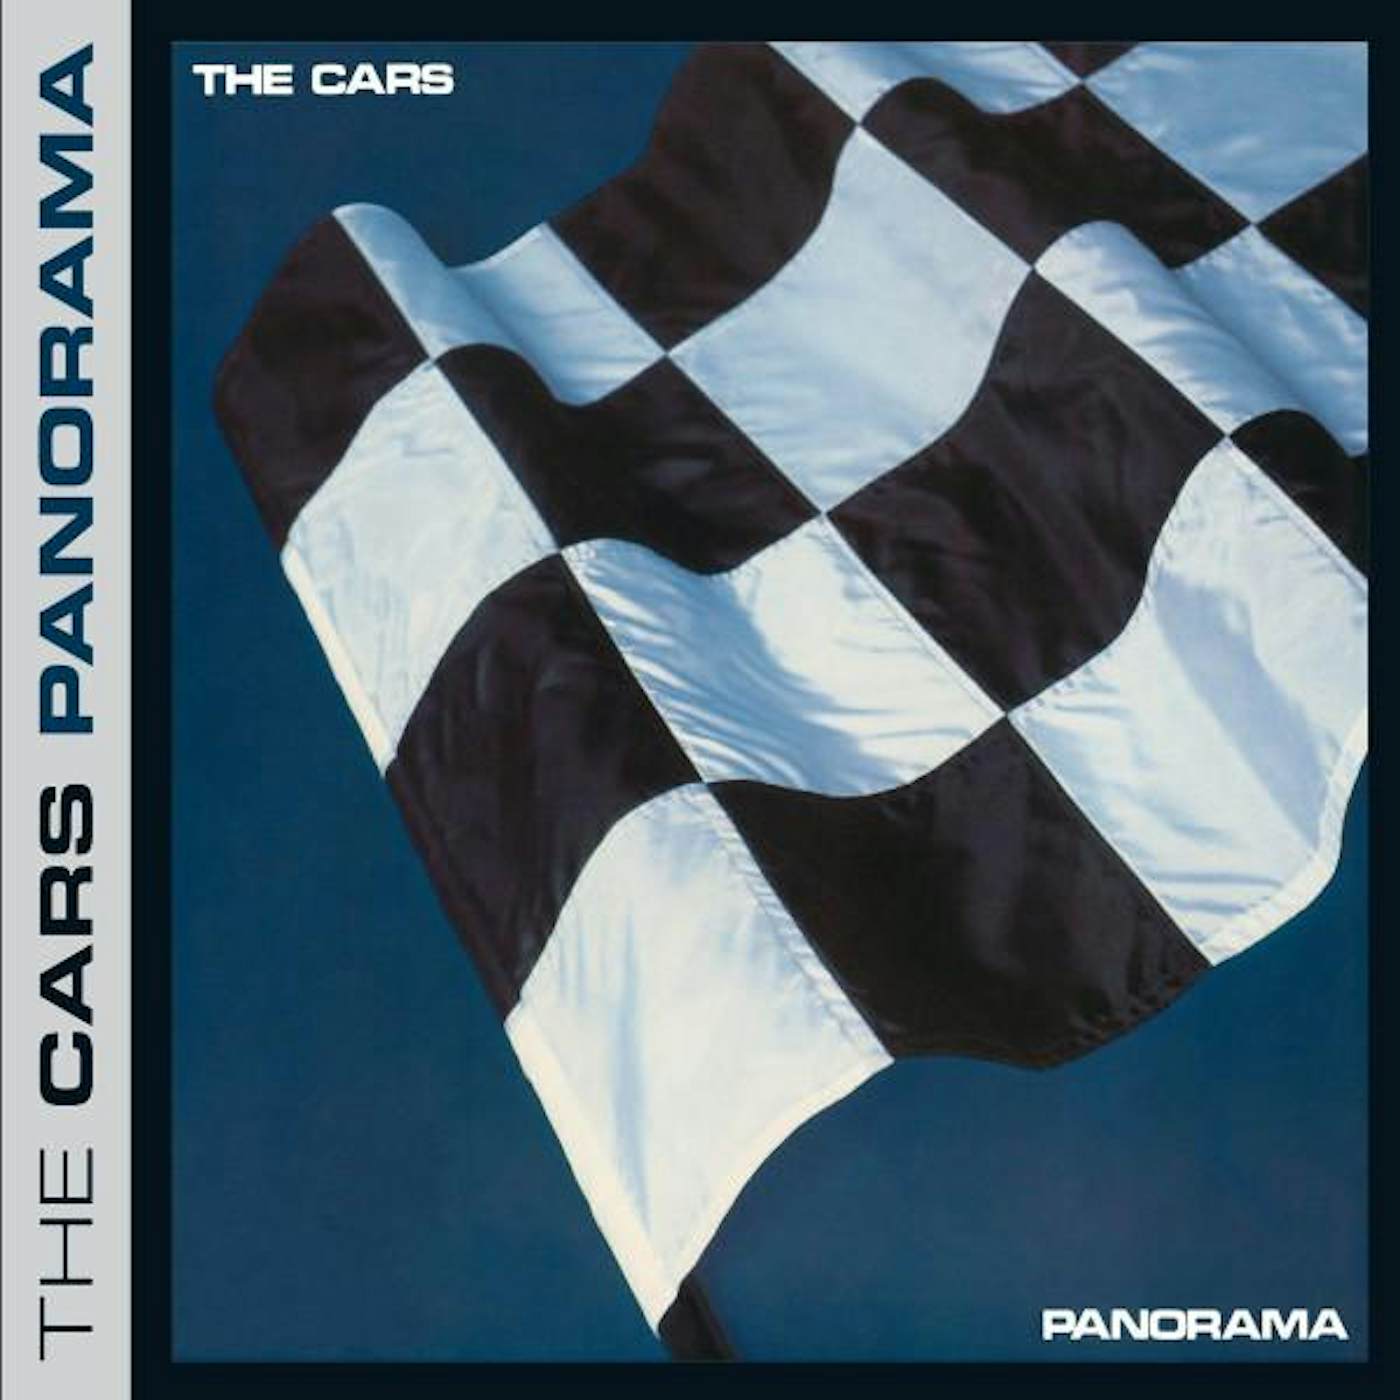 The Cars PANORAMA (EXPANDED EDITION) CD